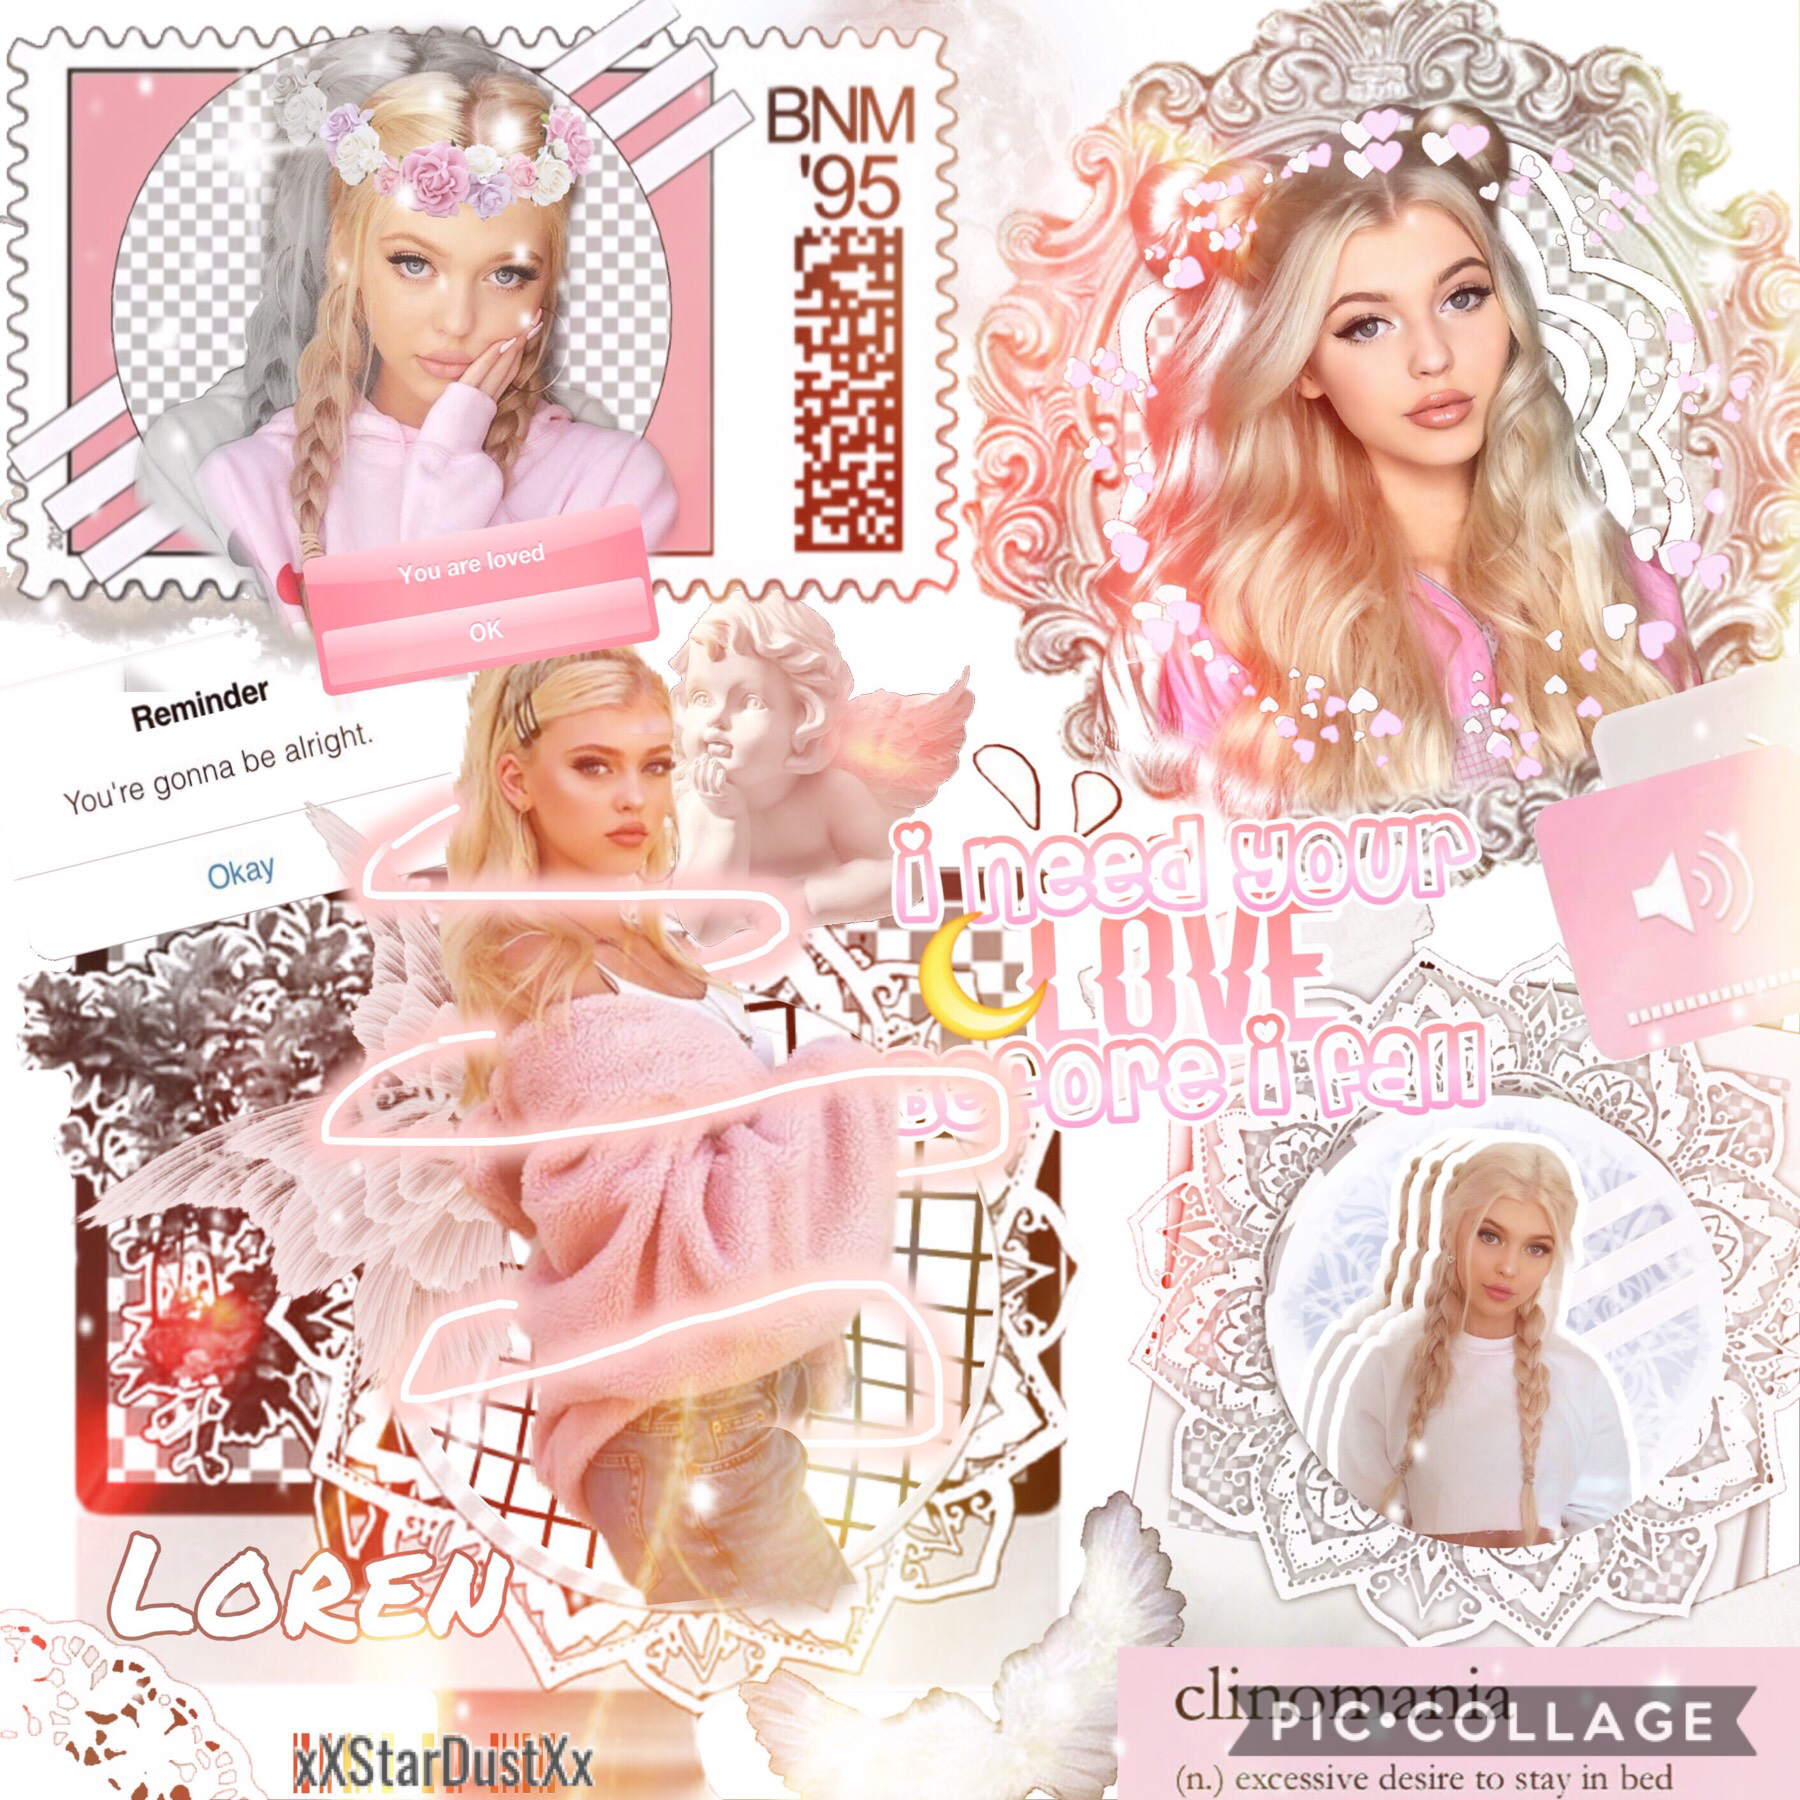 🌸Tap🌸
First time doing a complex edit. Rate 1-10